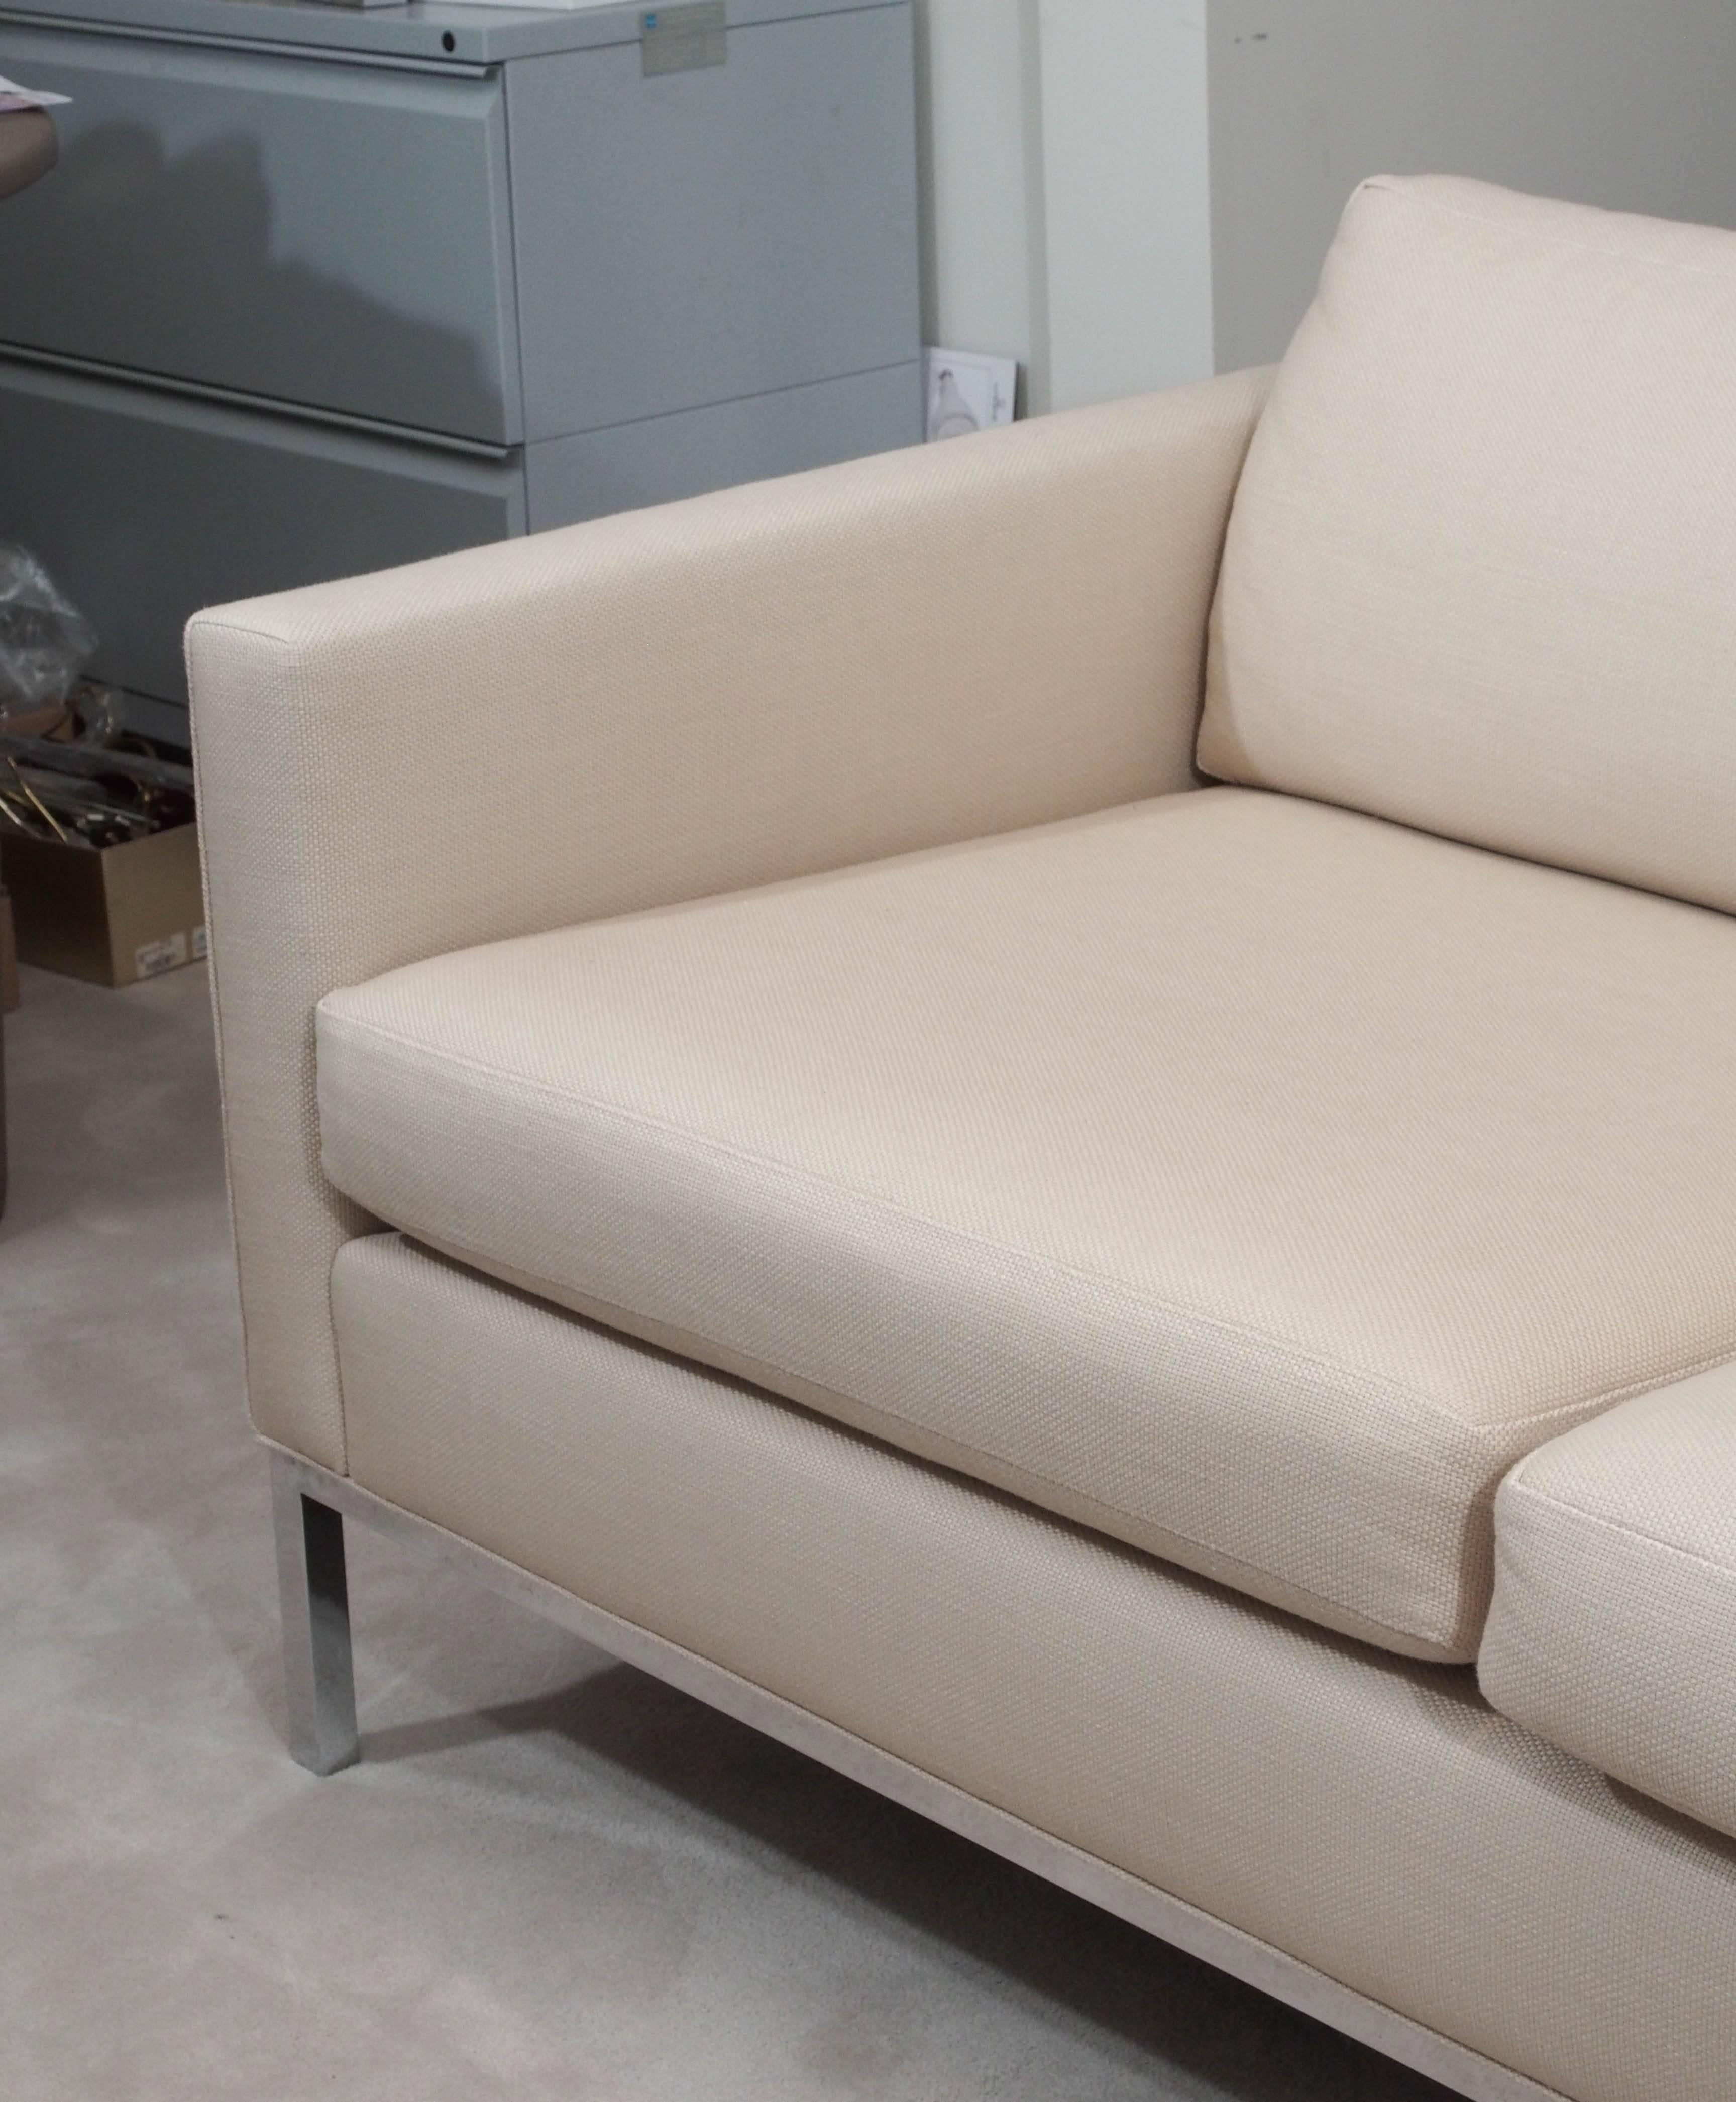 Handsome two-seat sofa in the style of Knoll; full-surround chrome-plated steel base; loose foam seat and back cushions; the whole upholstered in beige cotton weave.